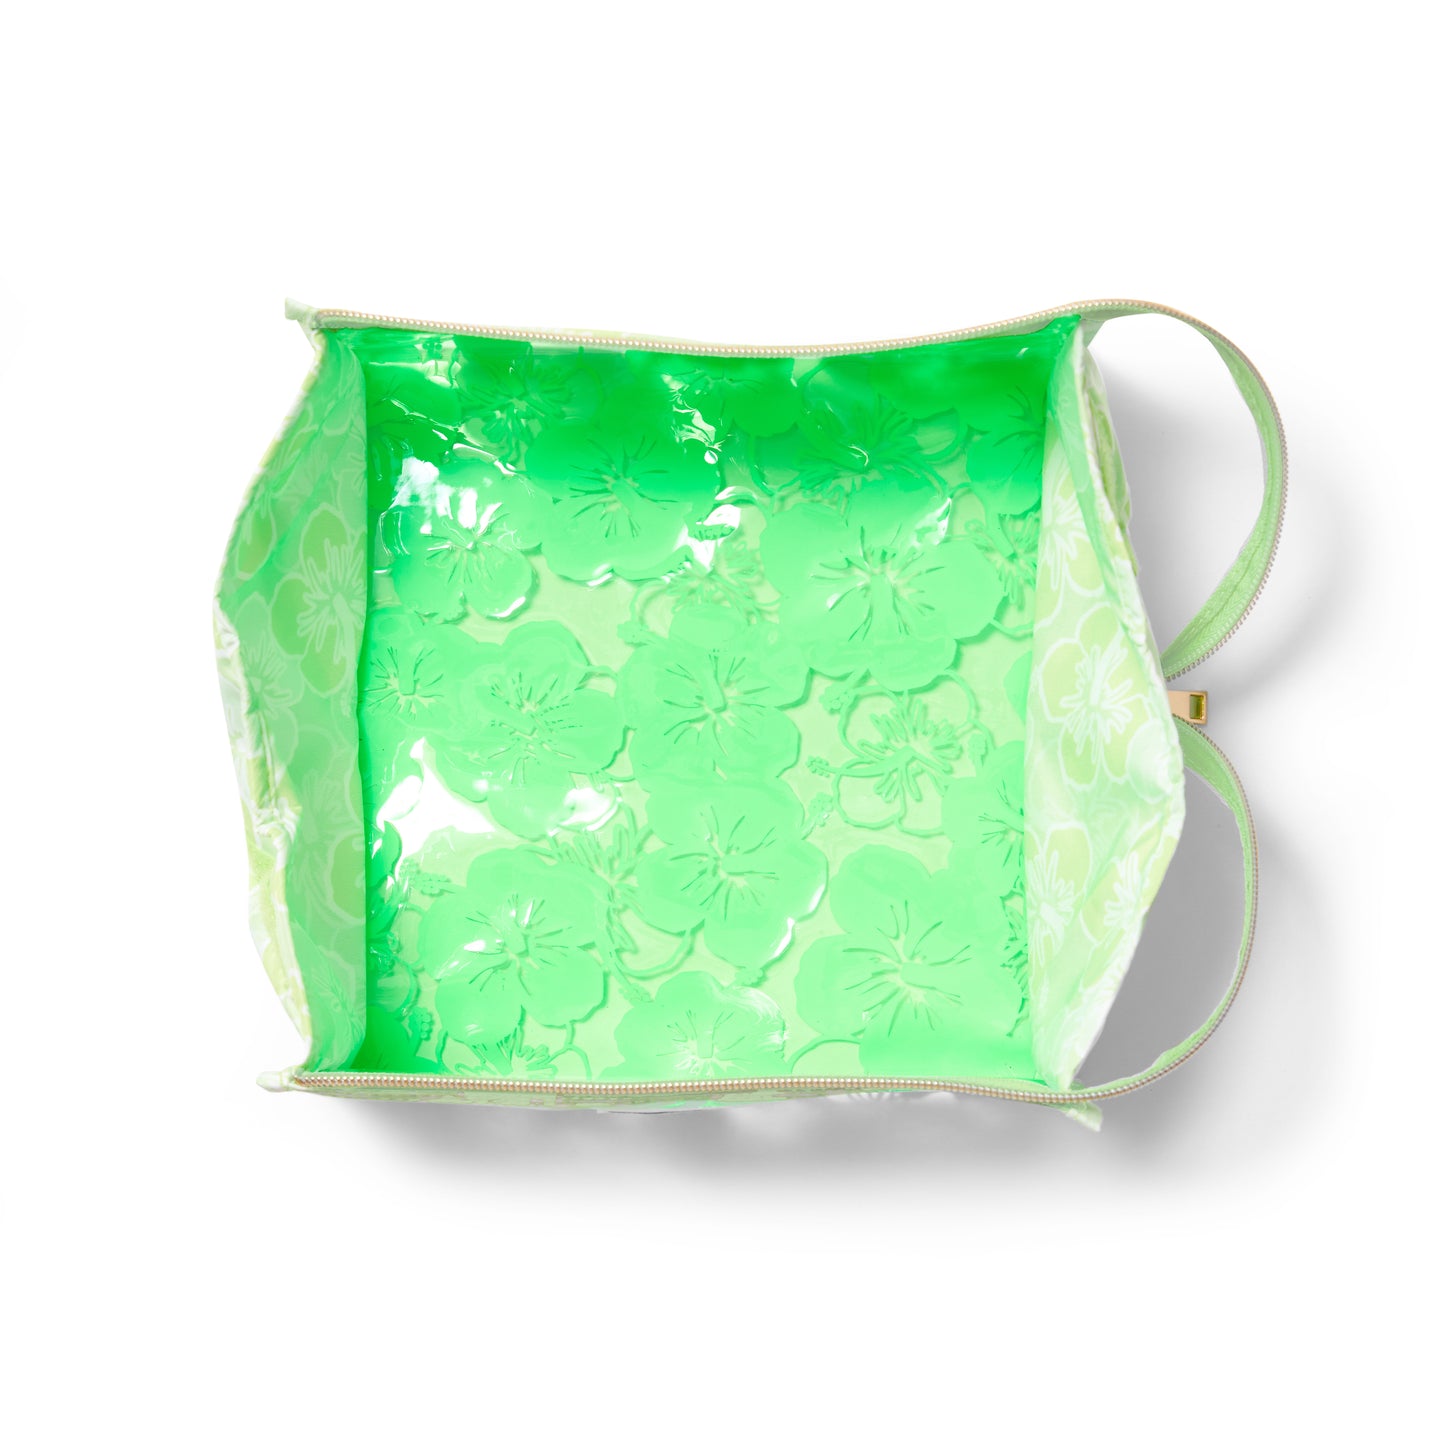 Jelly Open Flat Box Bag in Green Hibiscus